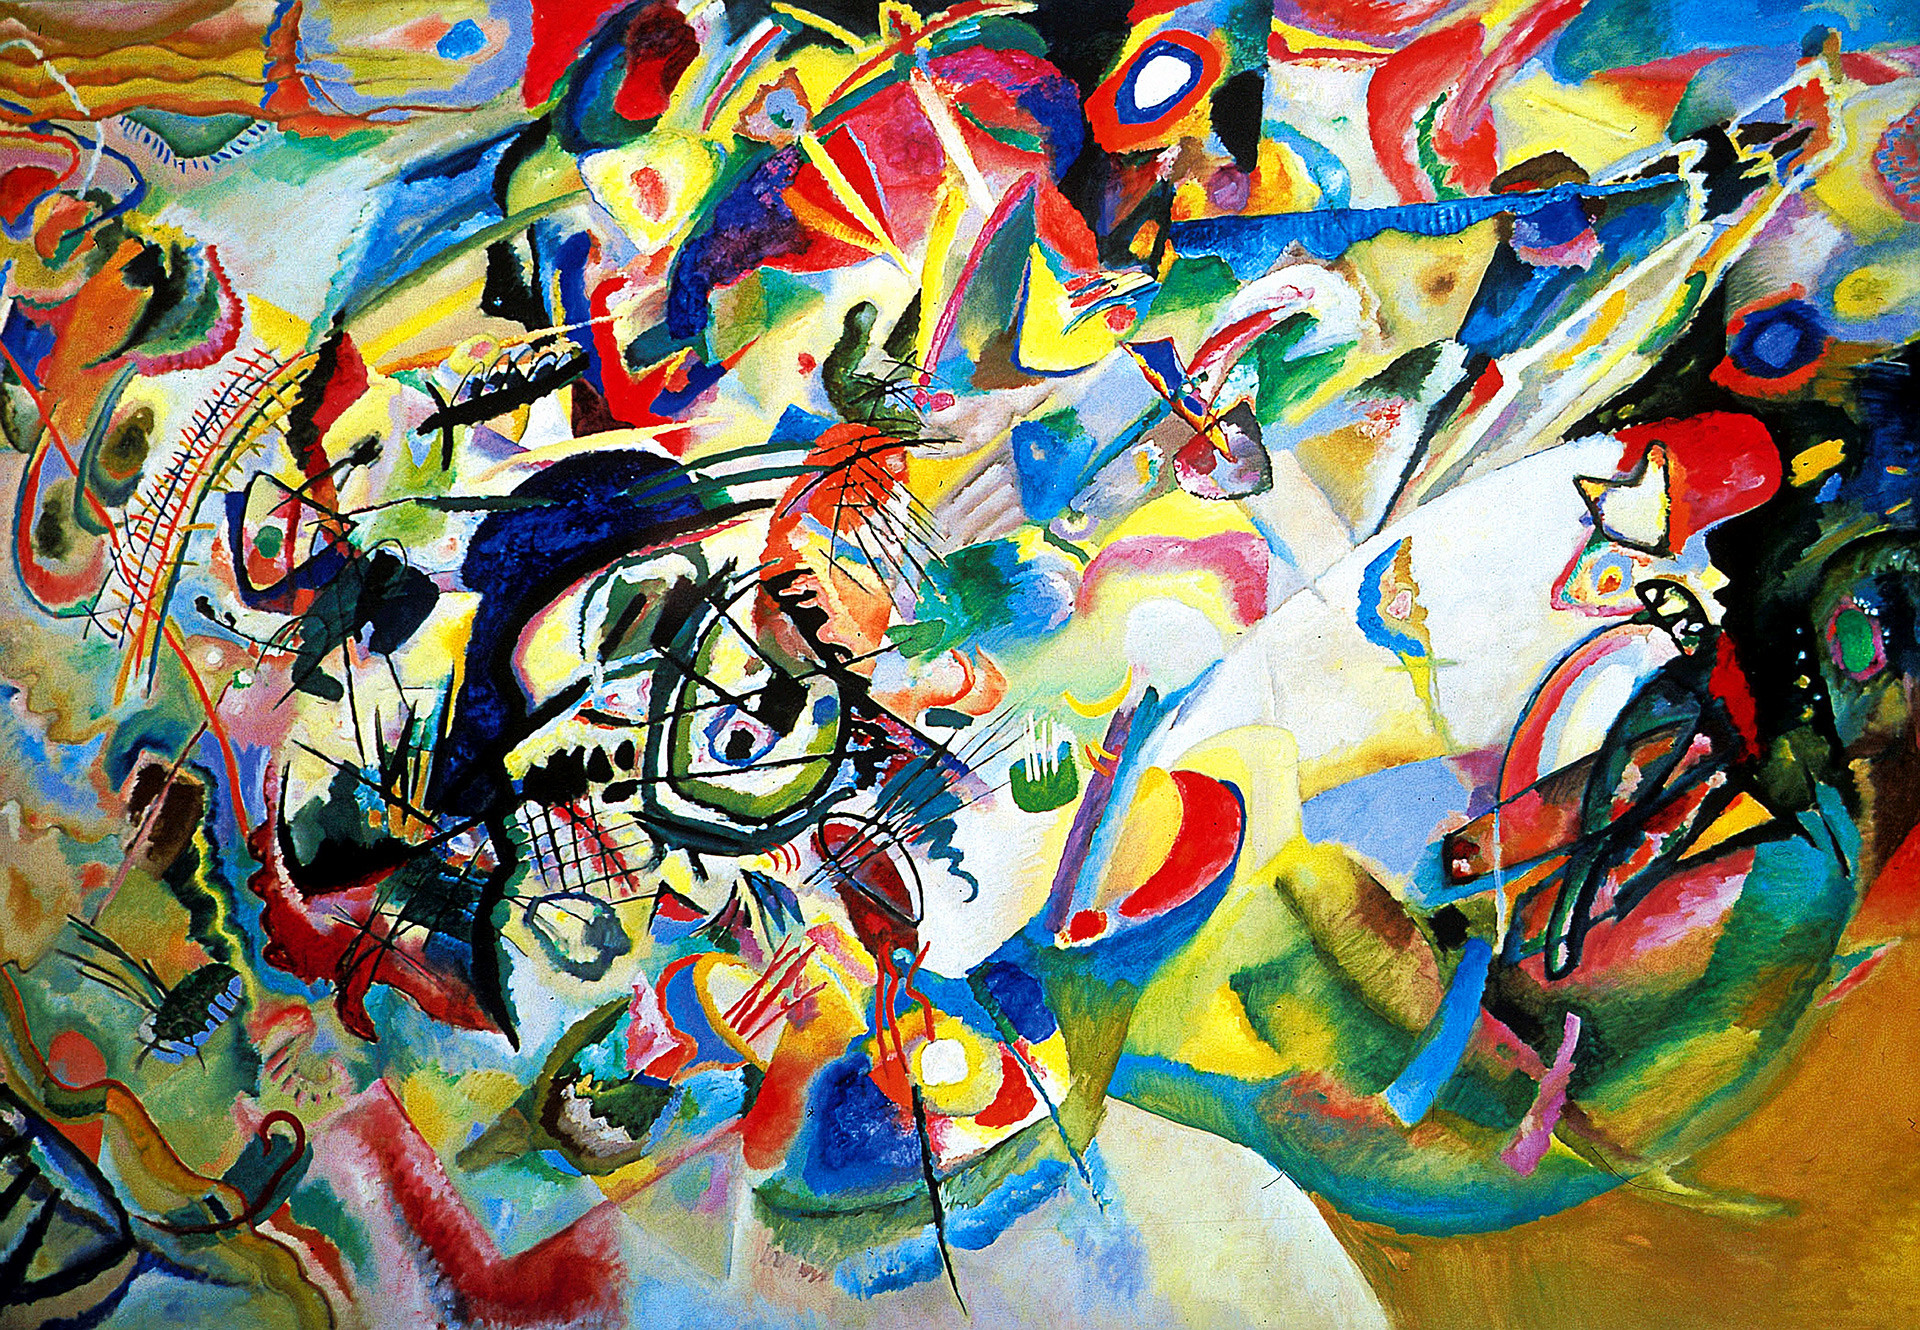 Composition VII by Wassily Kandinsky. 1913.